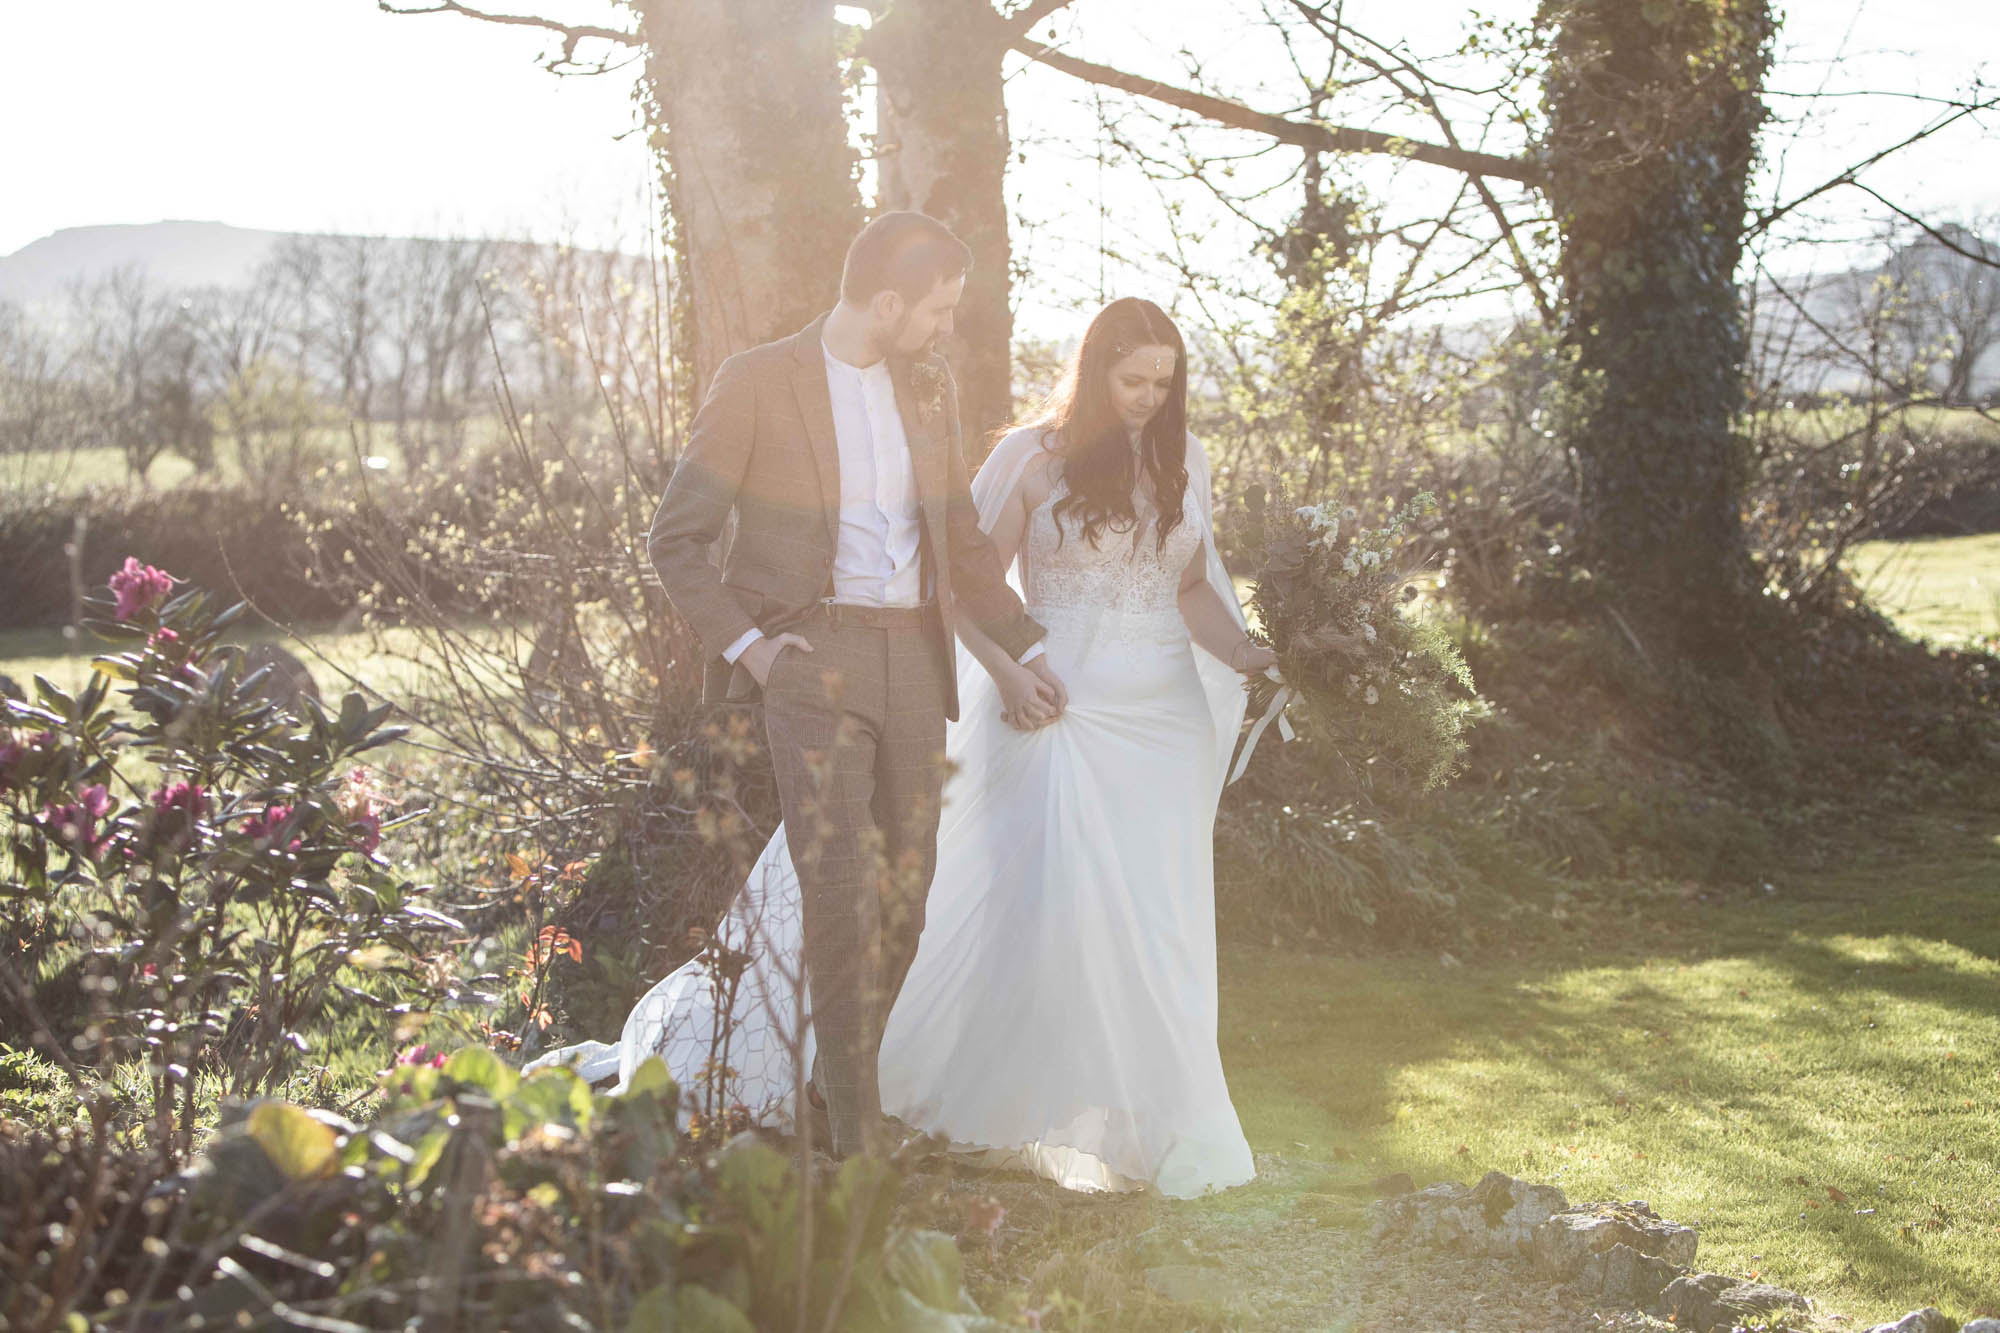 Hazy bright sunlit photograph of a bride and groom walking in a woodland. By Snapdragon Photography